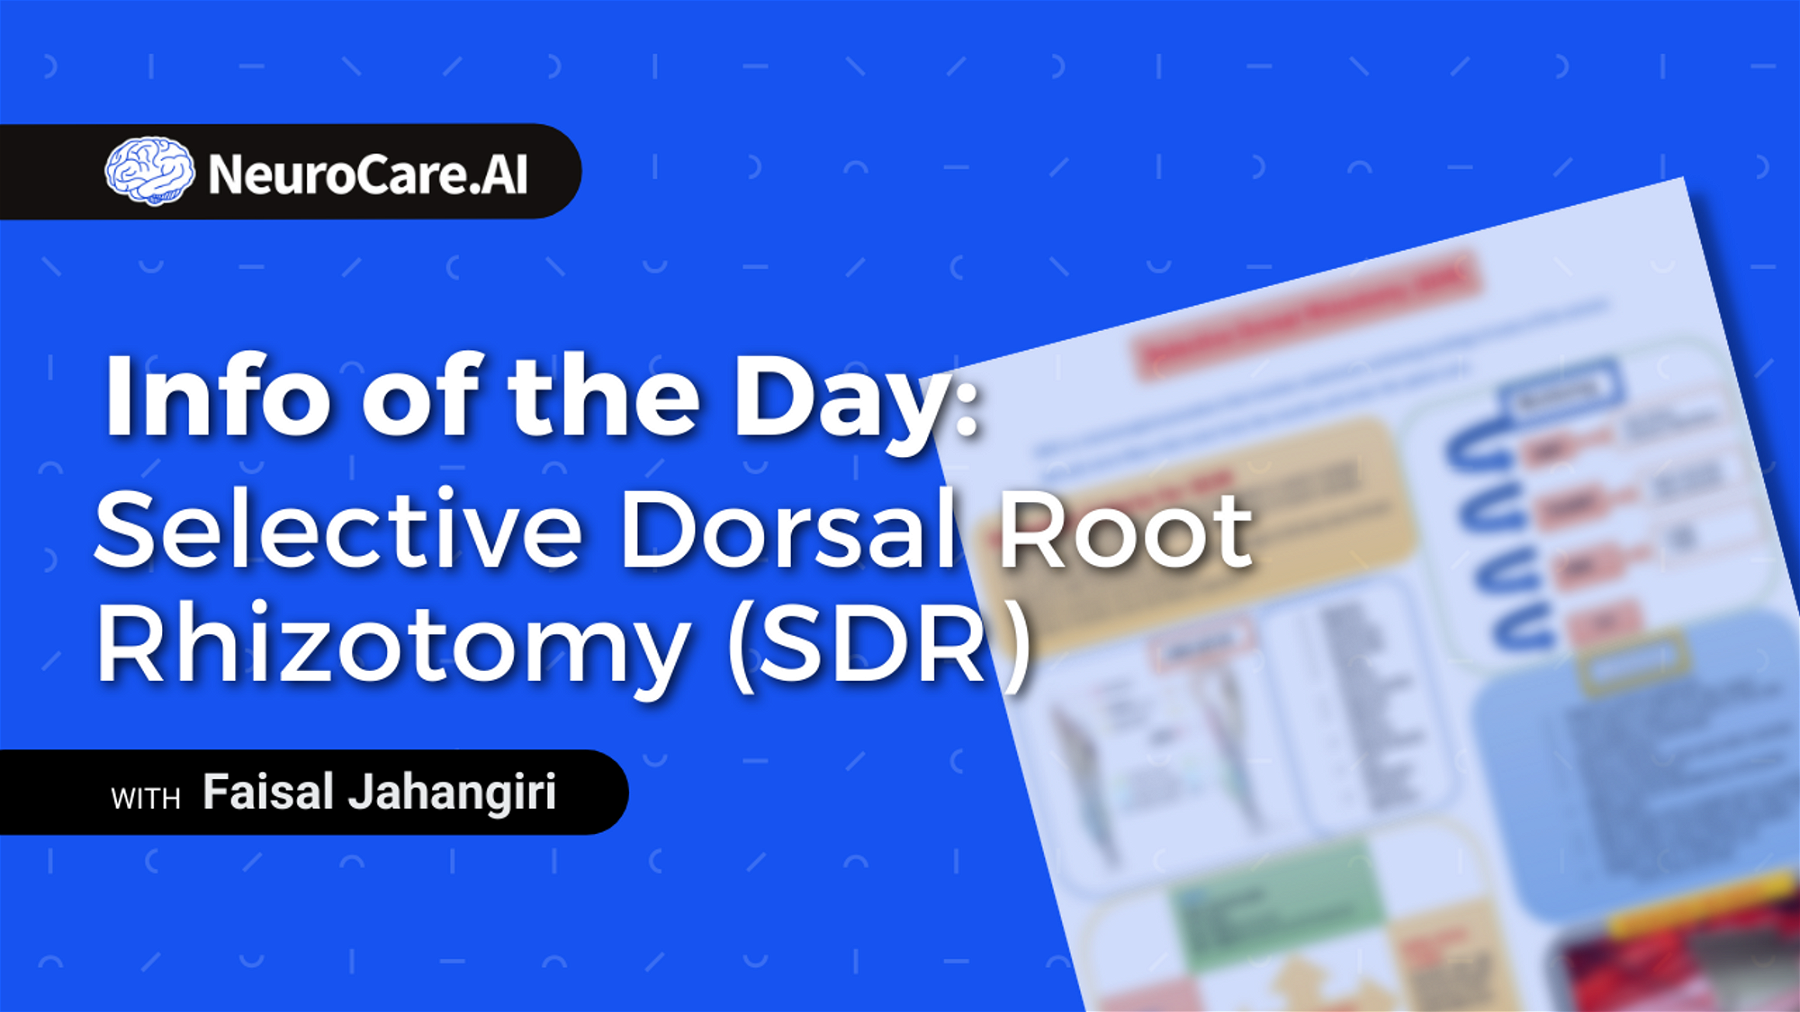 Info of the Day: "Selective Dorsal Root Rhizotomy (SDR)"